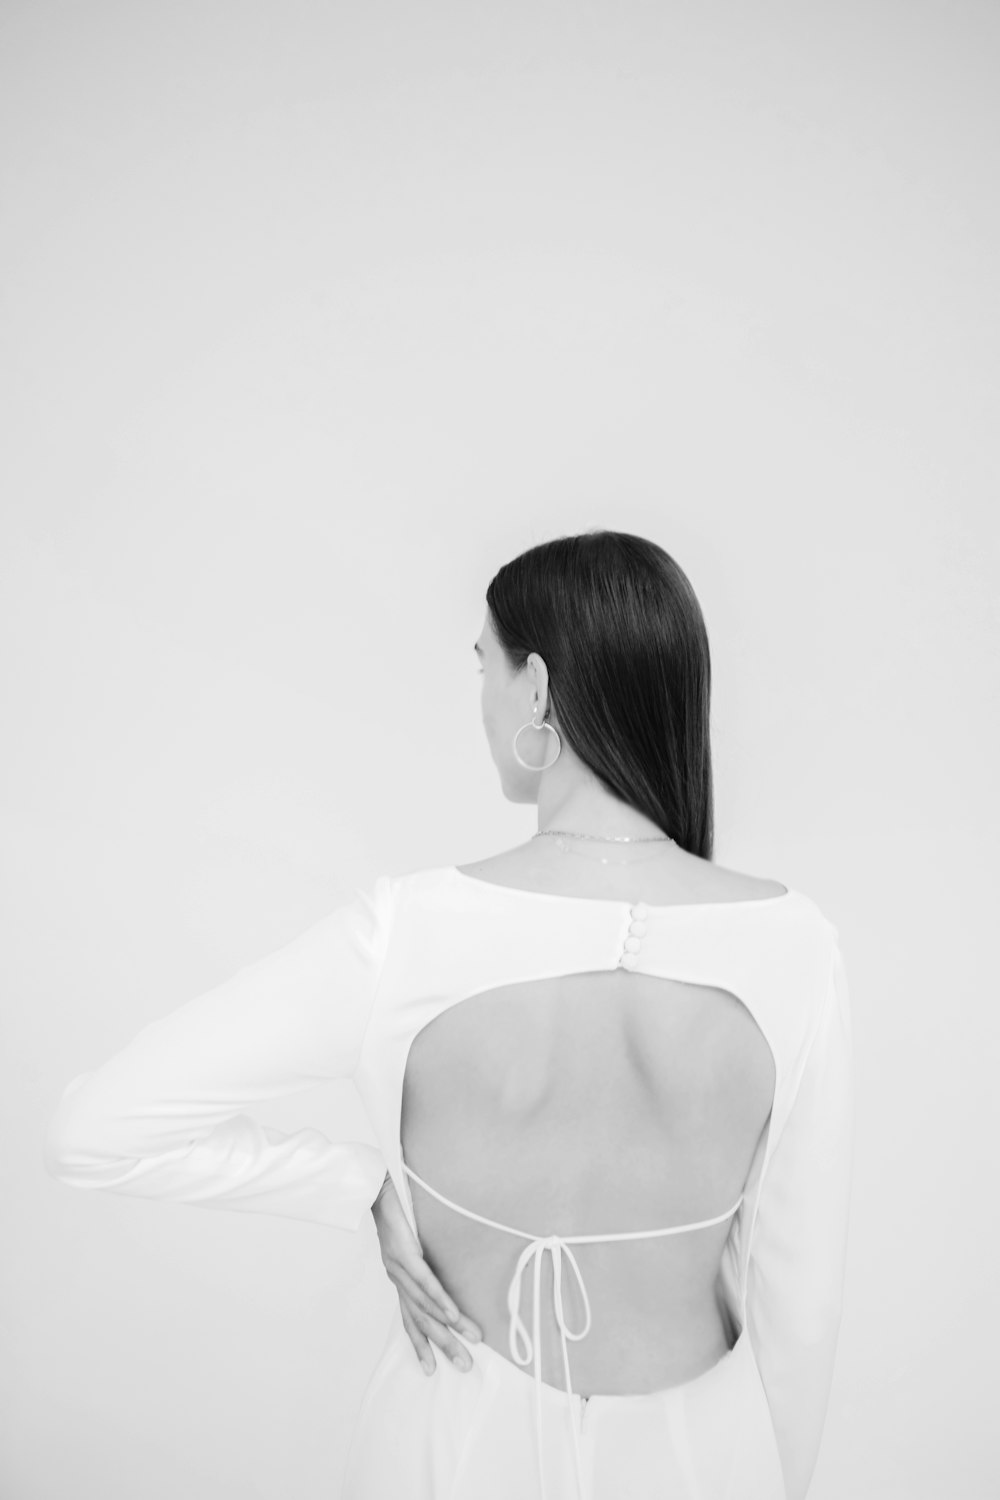 a woman in a white dress with her back to the camera